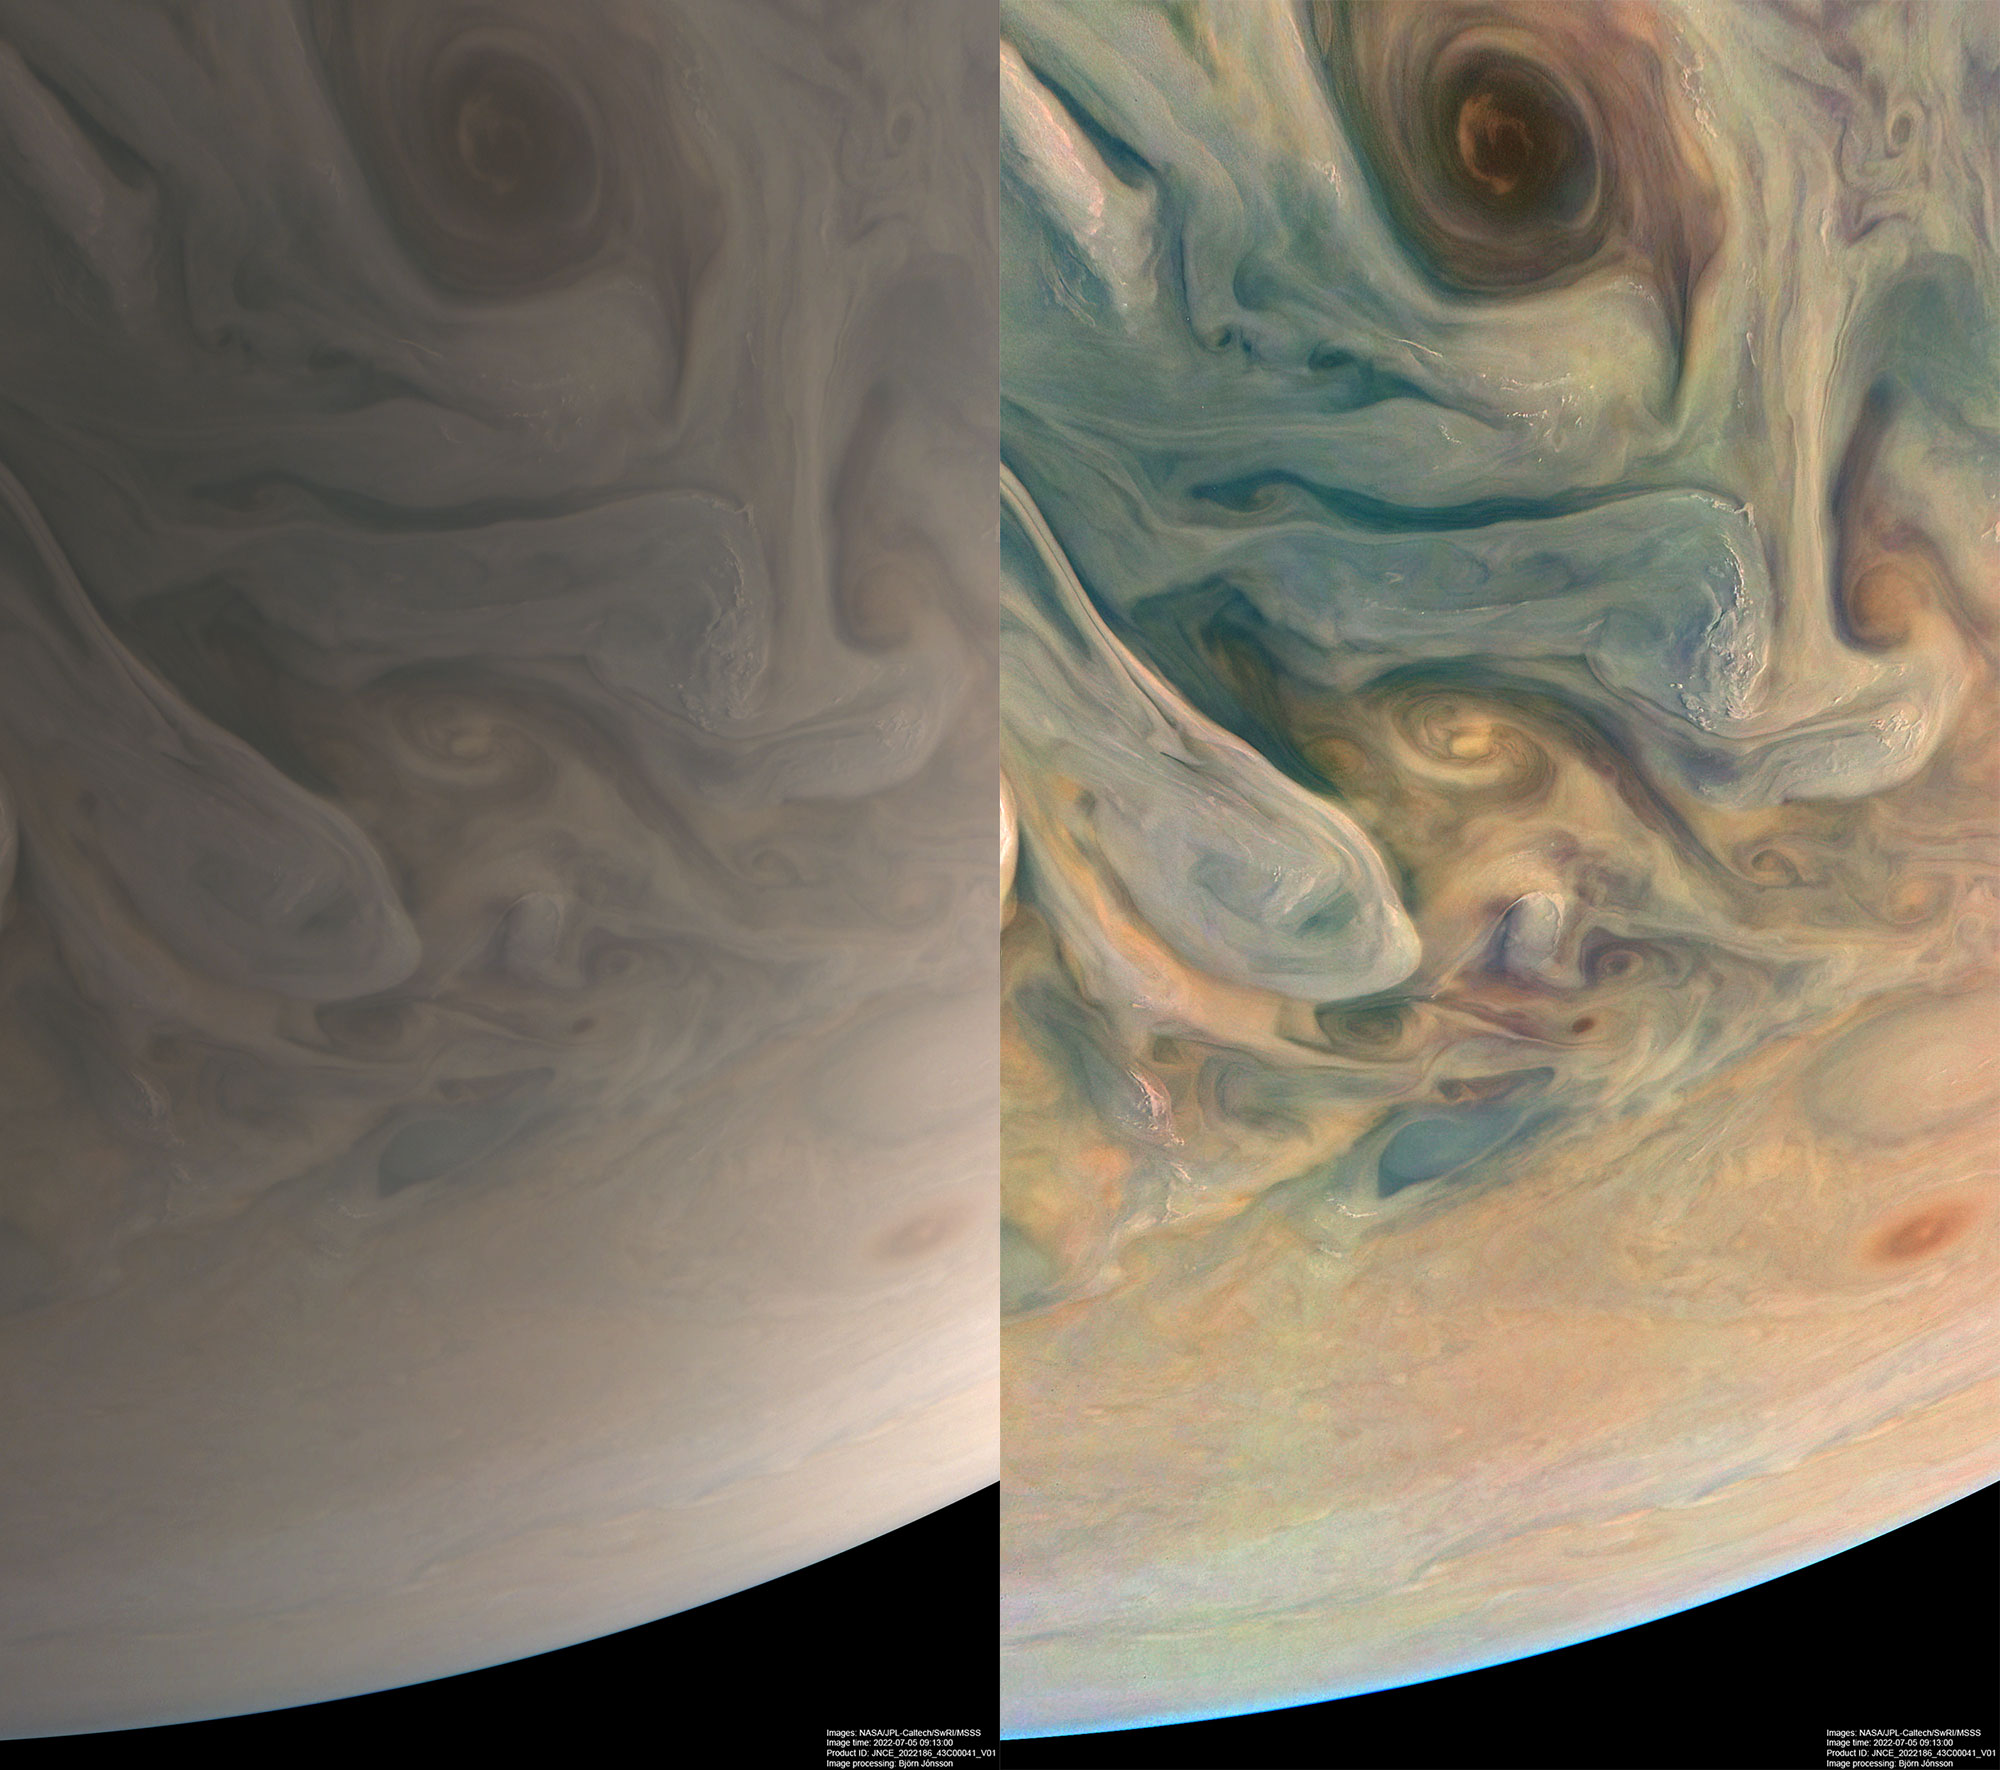 A comparison between two images of Jupiter. To the left is what the human eye would see, and to the right we have an image with increased contrast and sharpness. Image data: NASA/JPL-Caltech/SwRI/MSSS Image processing by Björn Jónsson © CC NC SA.